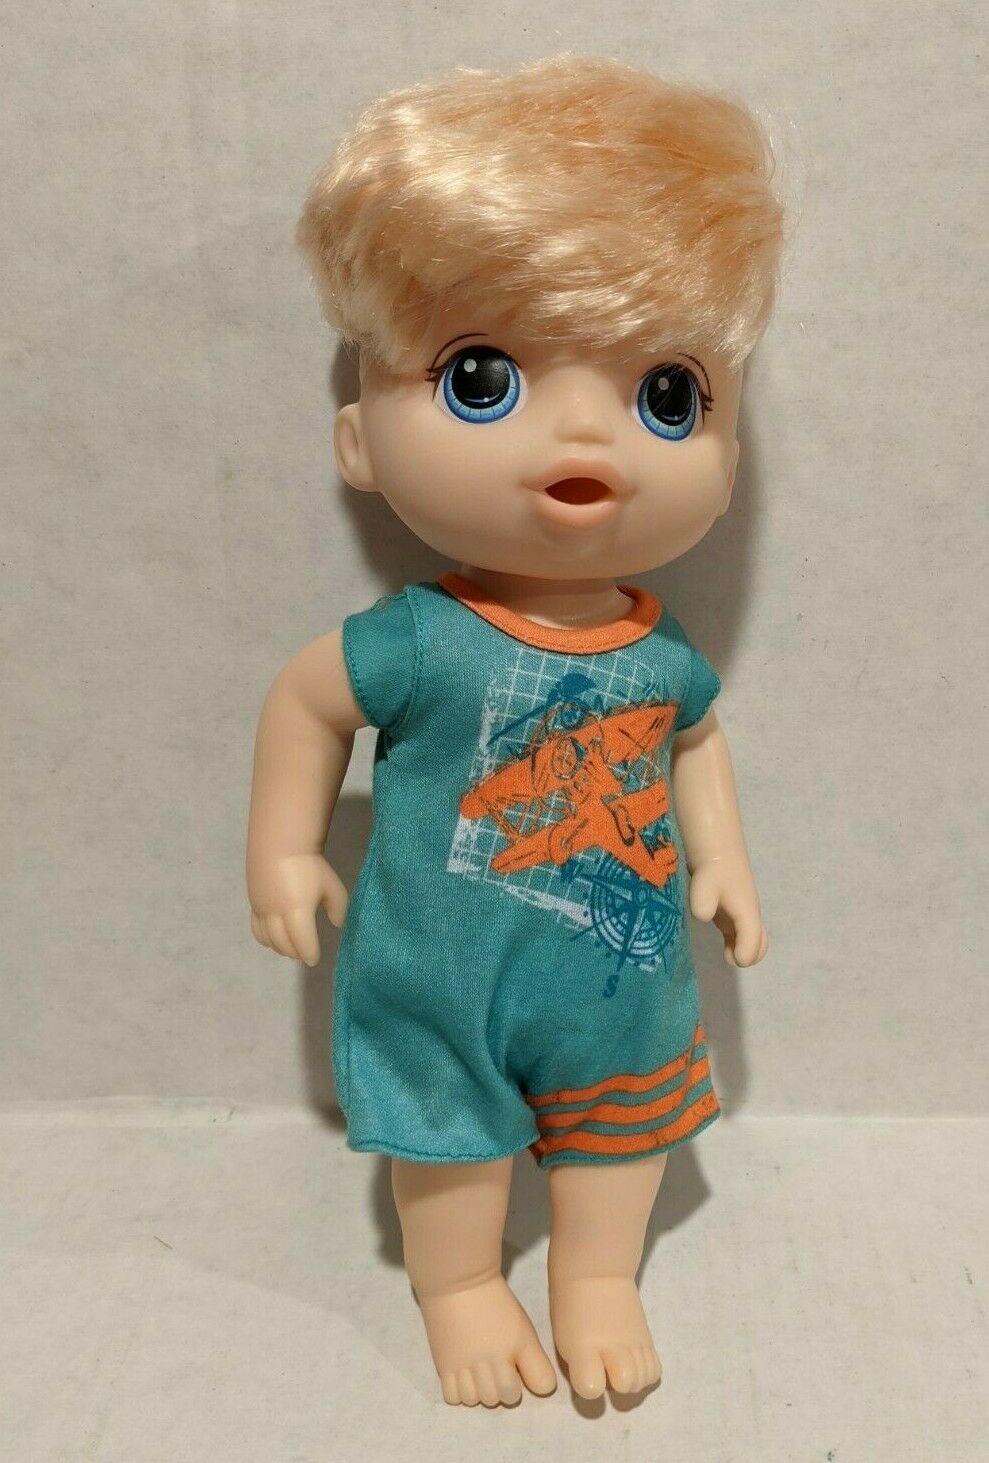 Baby Alive Sweet Spoonfuls Boy Doll - Hasbro Rooted Blonde Hair 12”